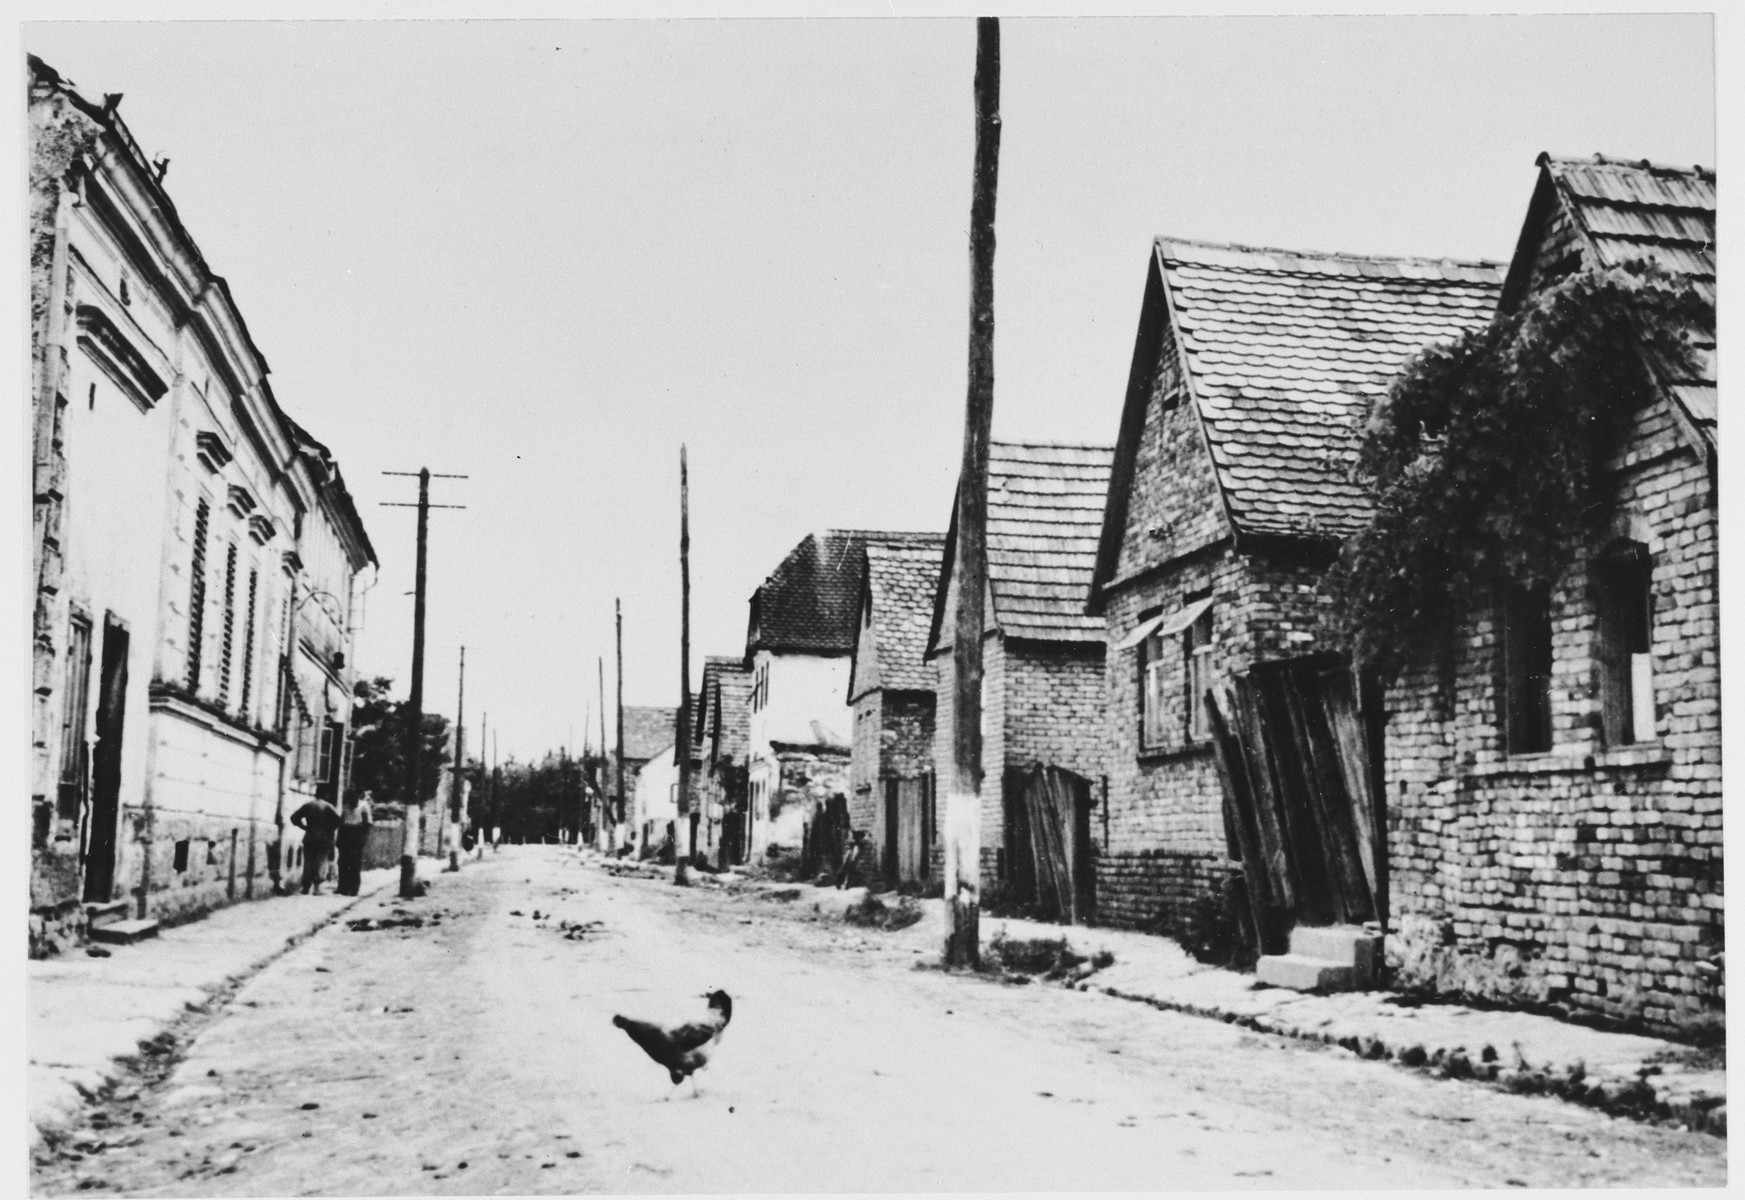 View of a street in the Jasenovac concentration camp.